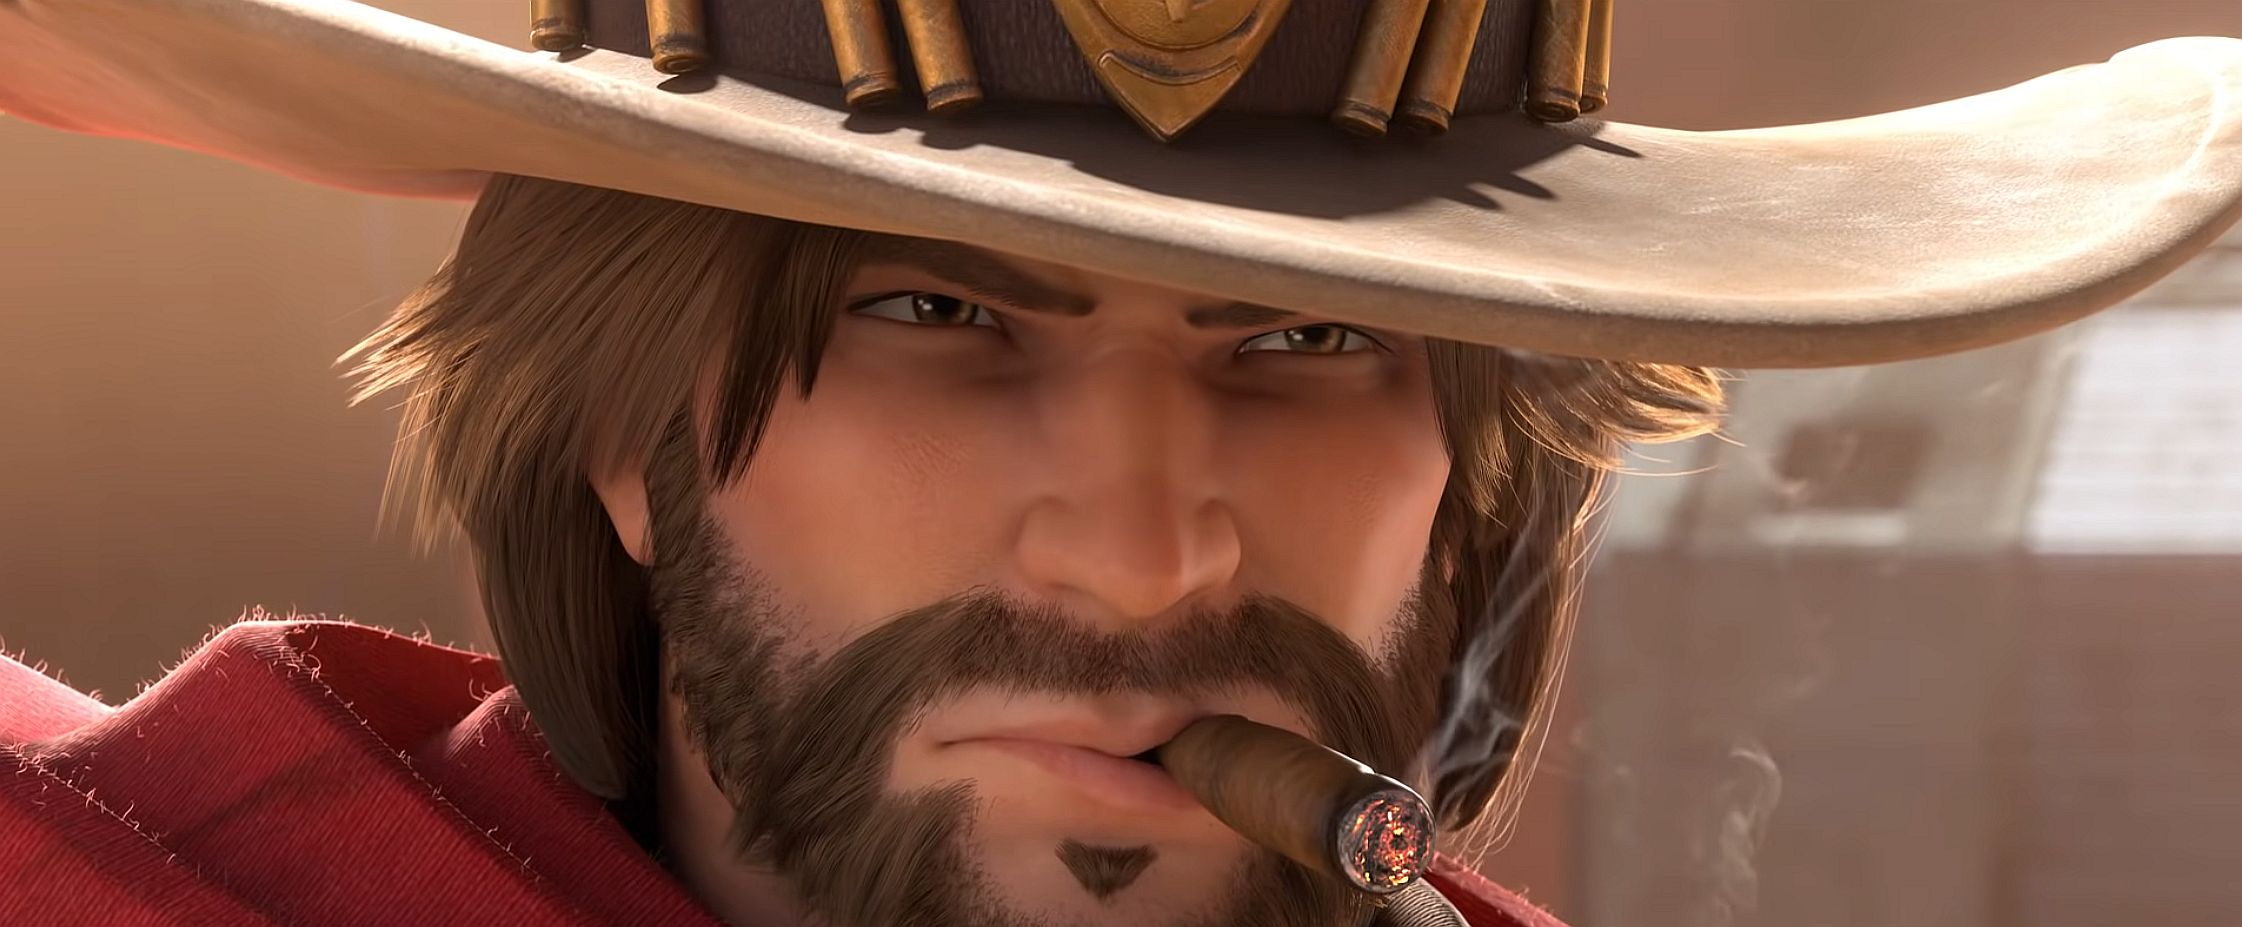 Image for Overwatch’s McCree gets a name change next week